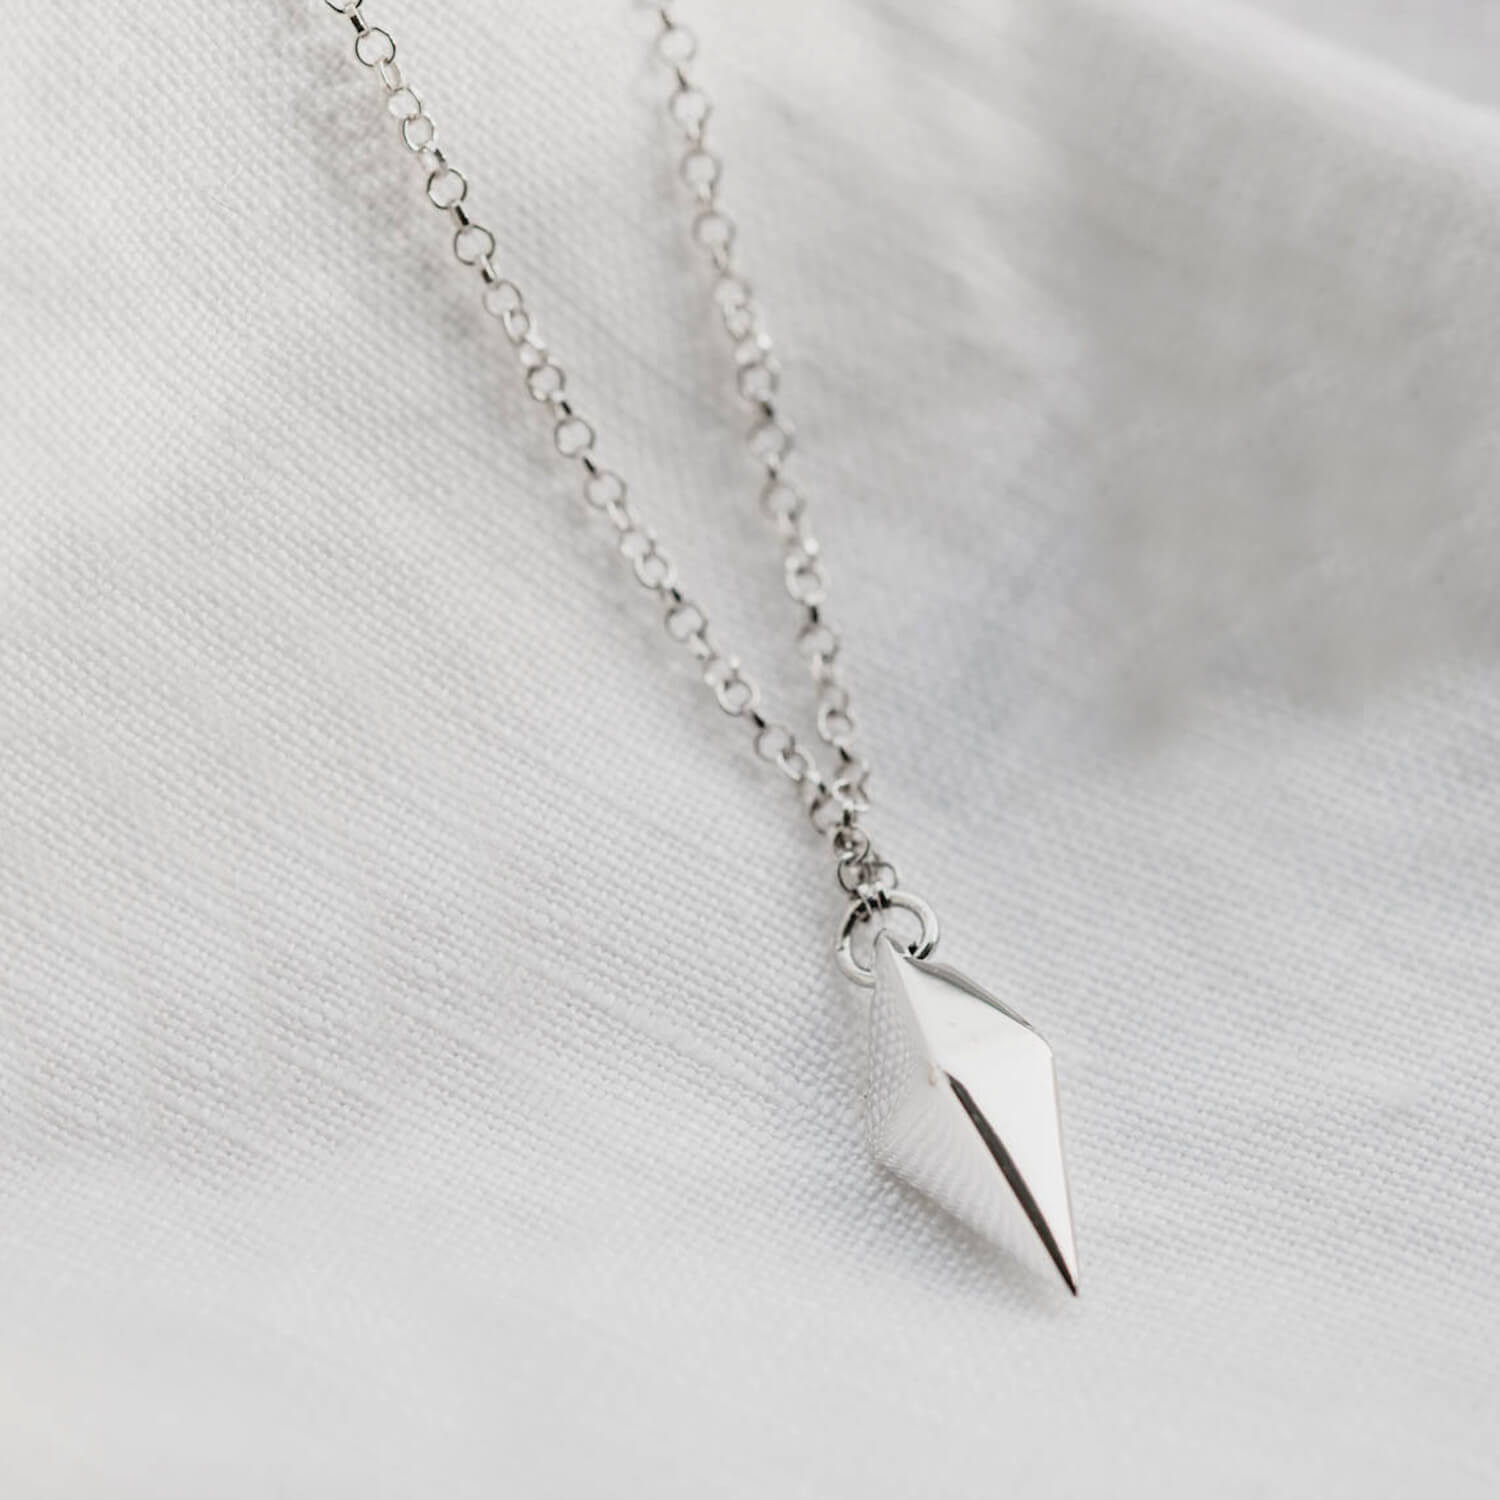 Close up of a silver pendant with a kite shaped charm